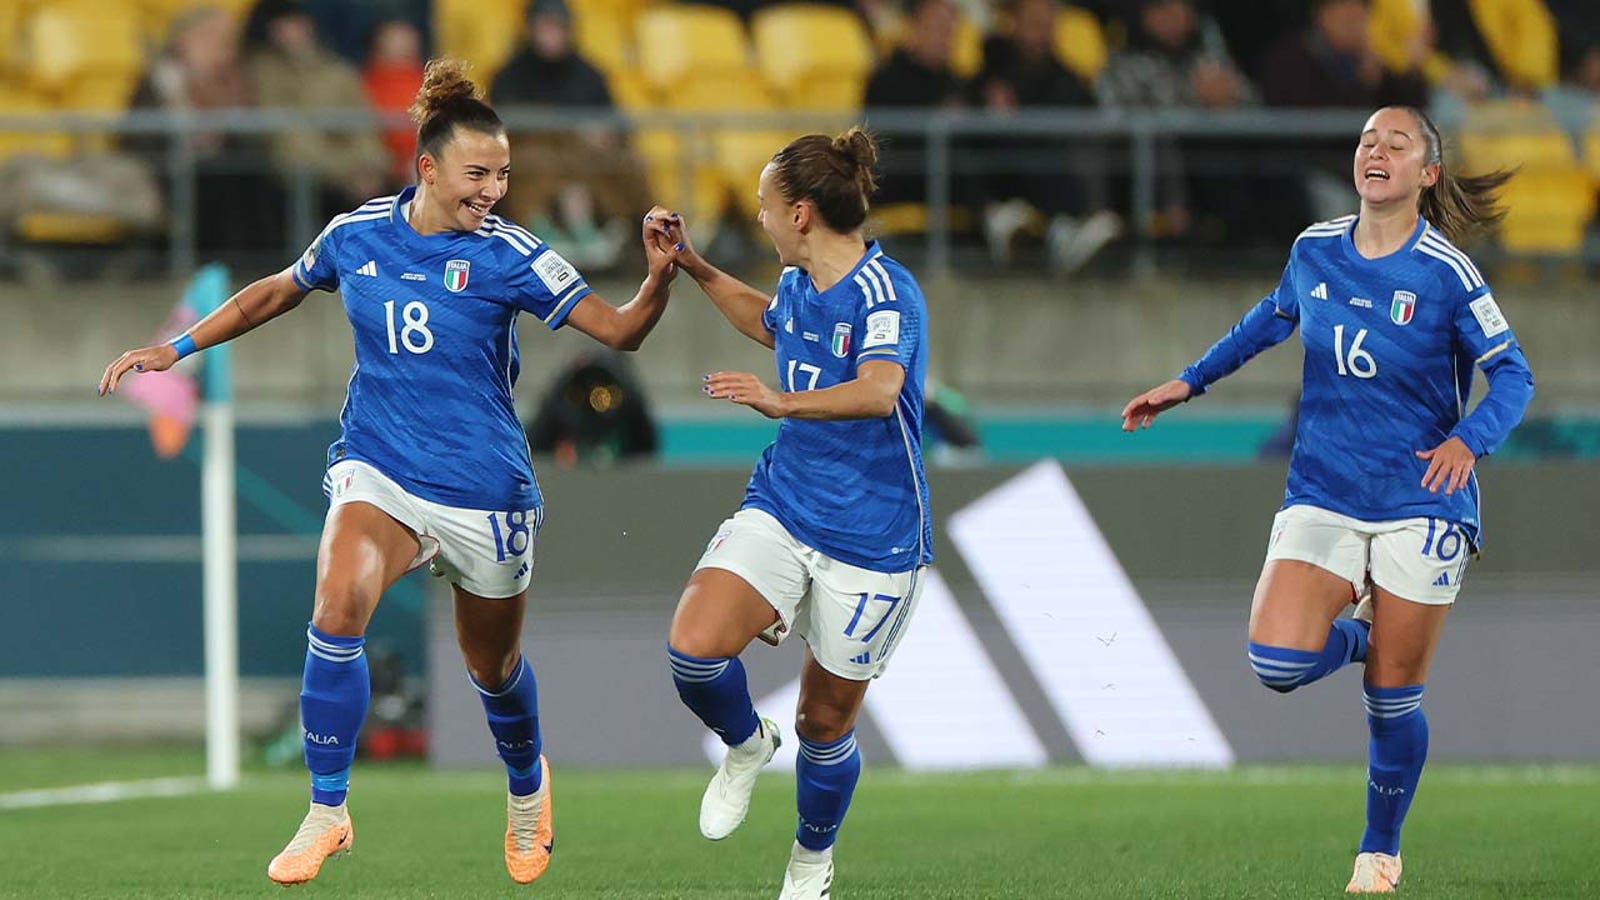 Italy's Arianna Caruso scores goal vs. South Africa in 11'